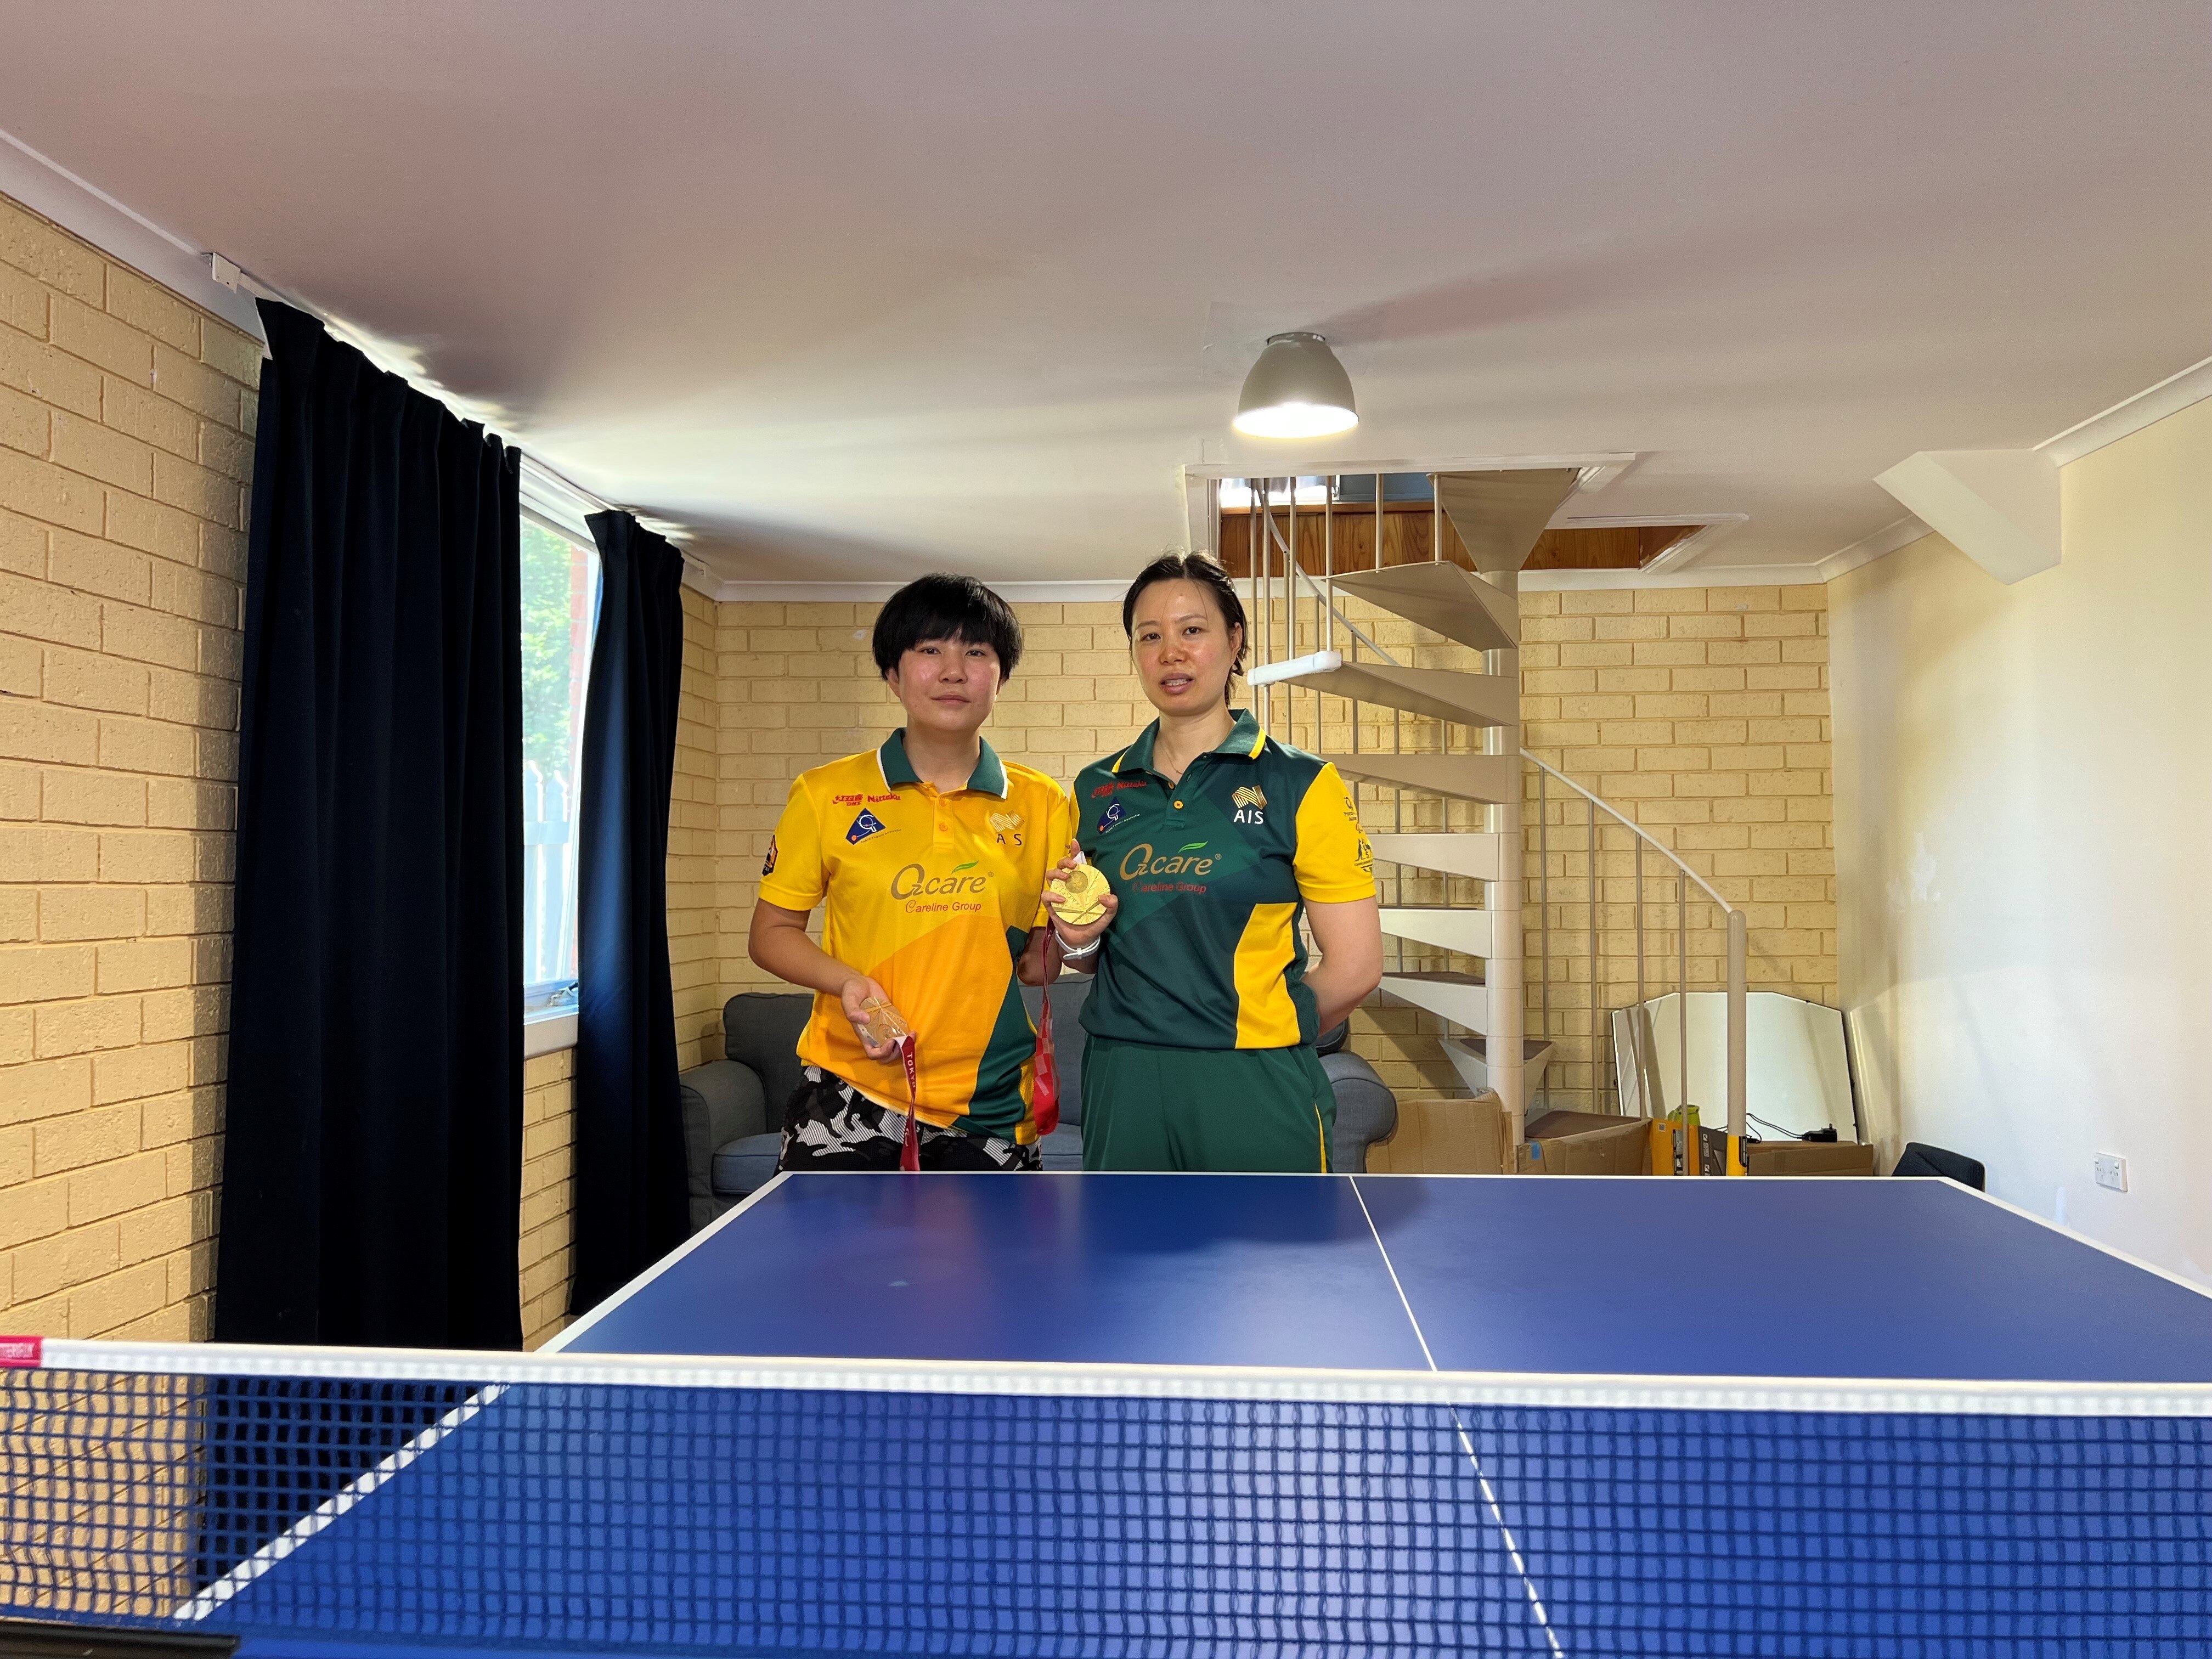 Chinese Australian table tennis players Lina Lei and Qian Yang awarded Medal of the Order of AustraliaChinese Australian table tennis players Lina Lei and Qian Yang awarded Medal of the Order of Australia.